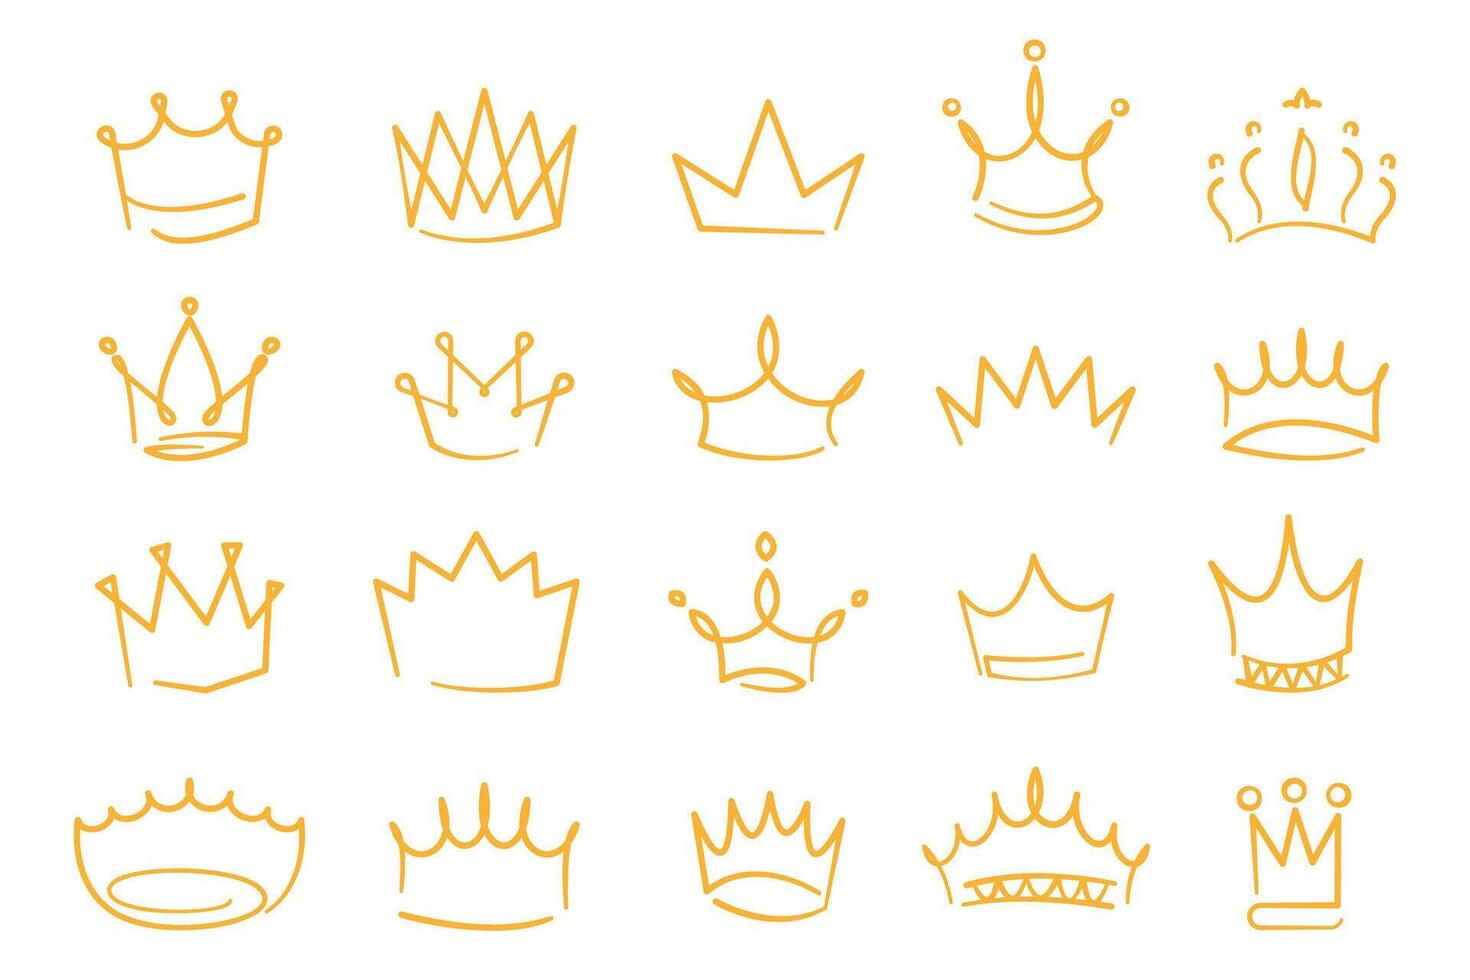 Sketch golden crowns. Outline princess tiara and coronation decorations. Modern hand drawn royalty symbols. Vector isolated set